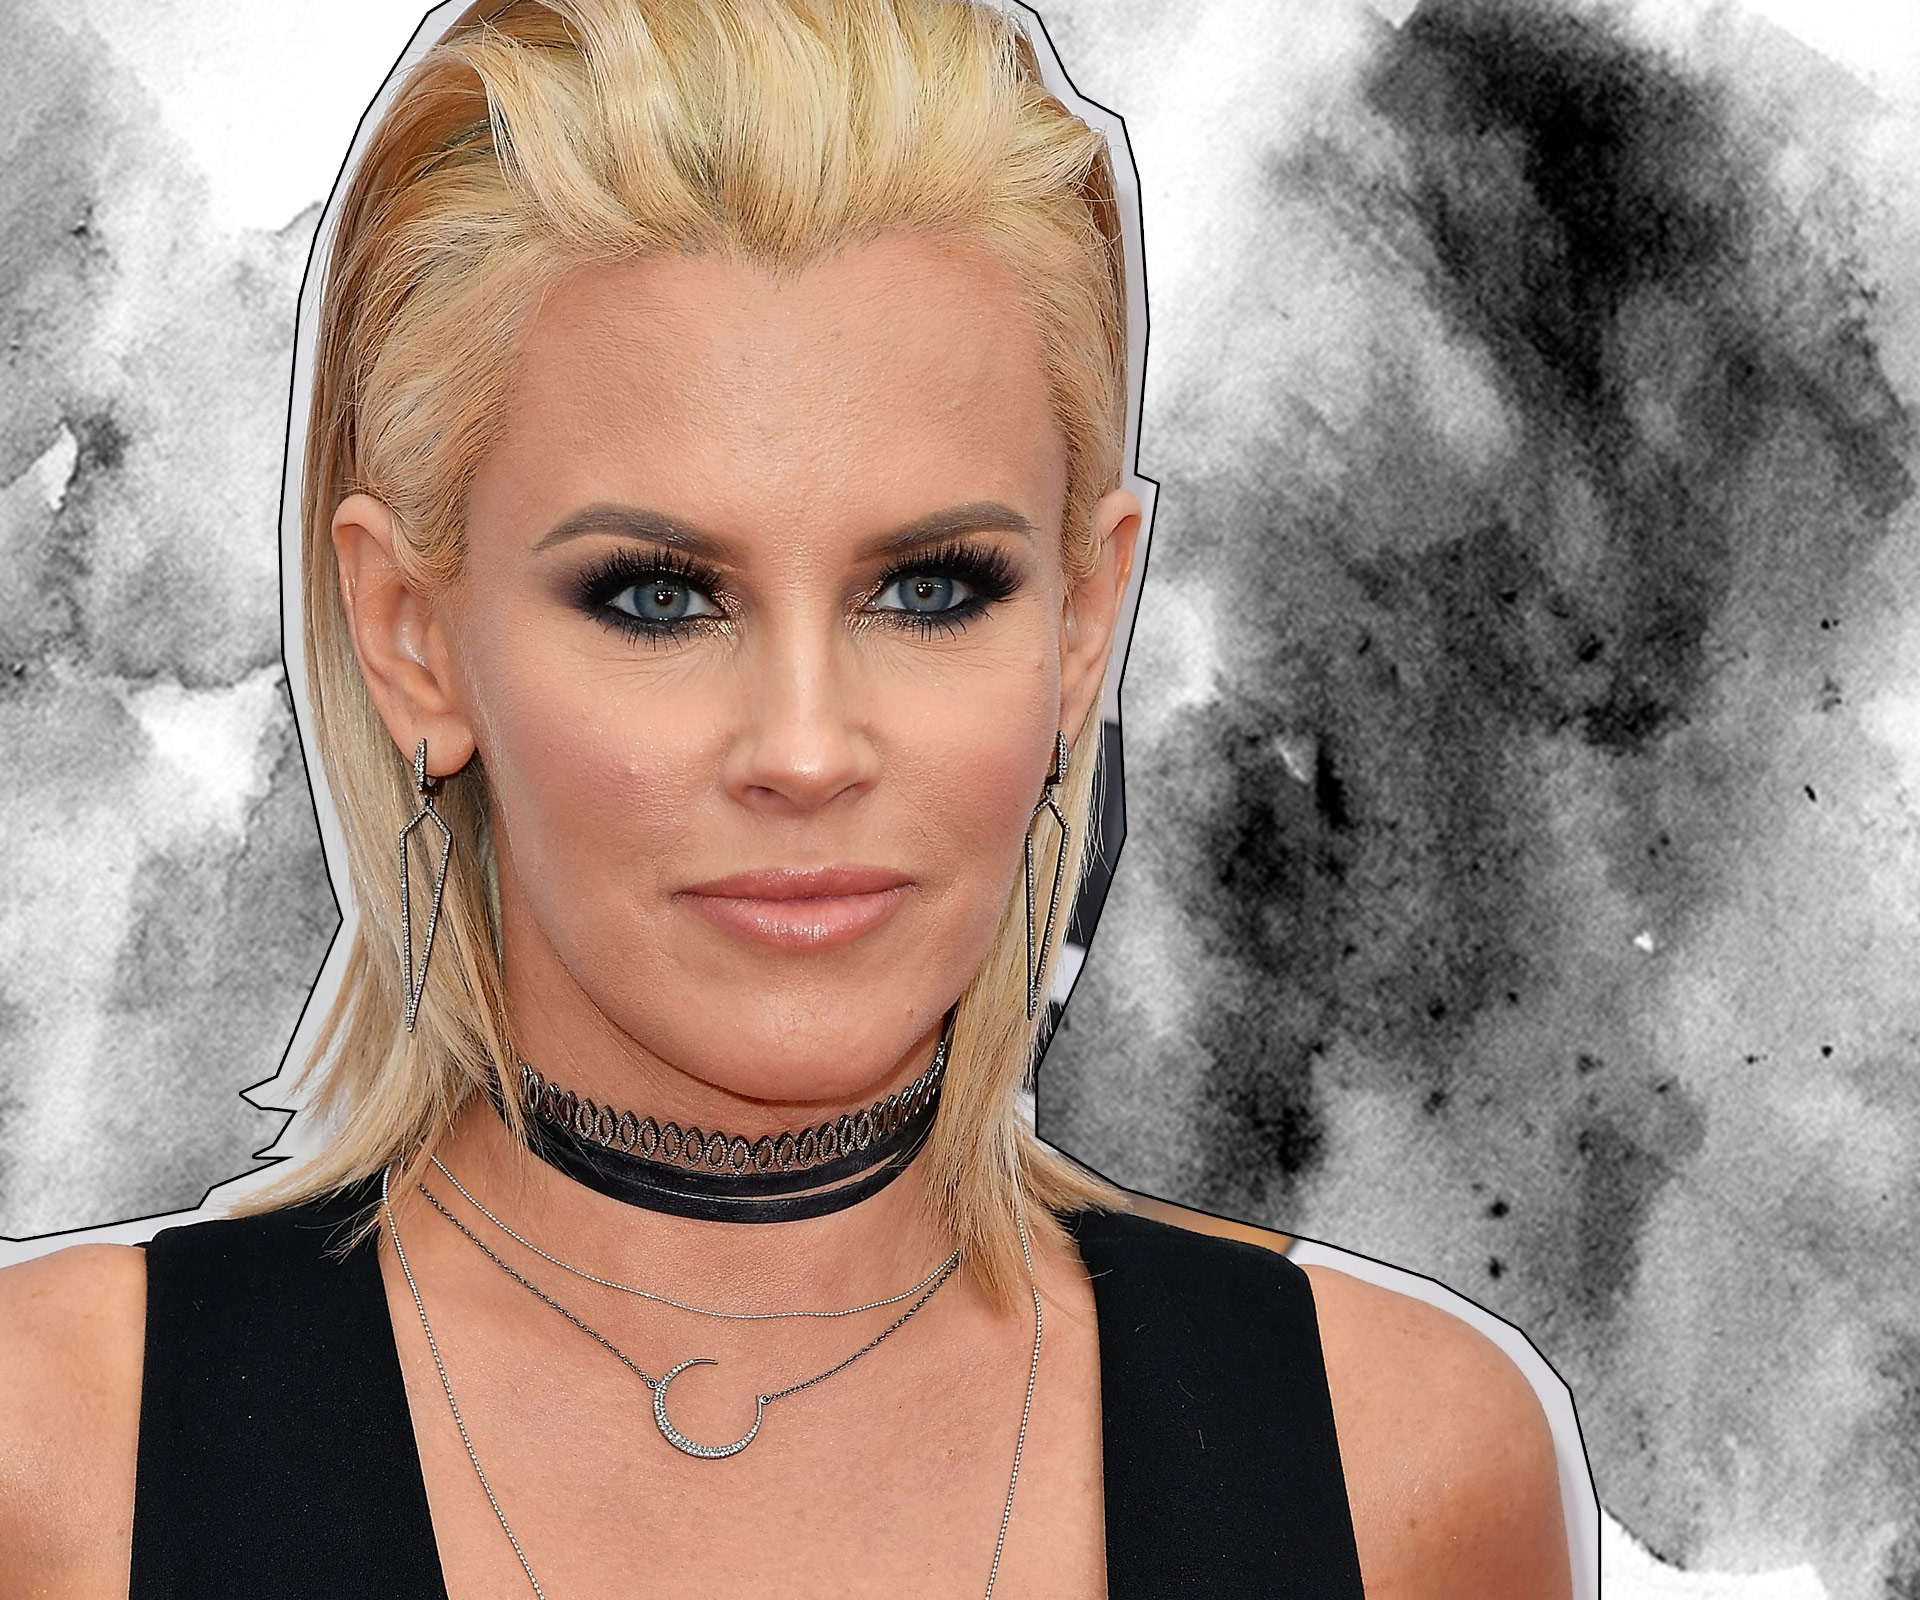 How Jenny McCarthy escaped a “dark, abusive” relationship